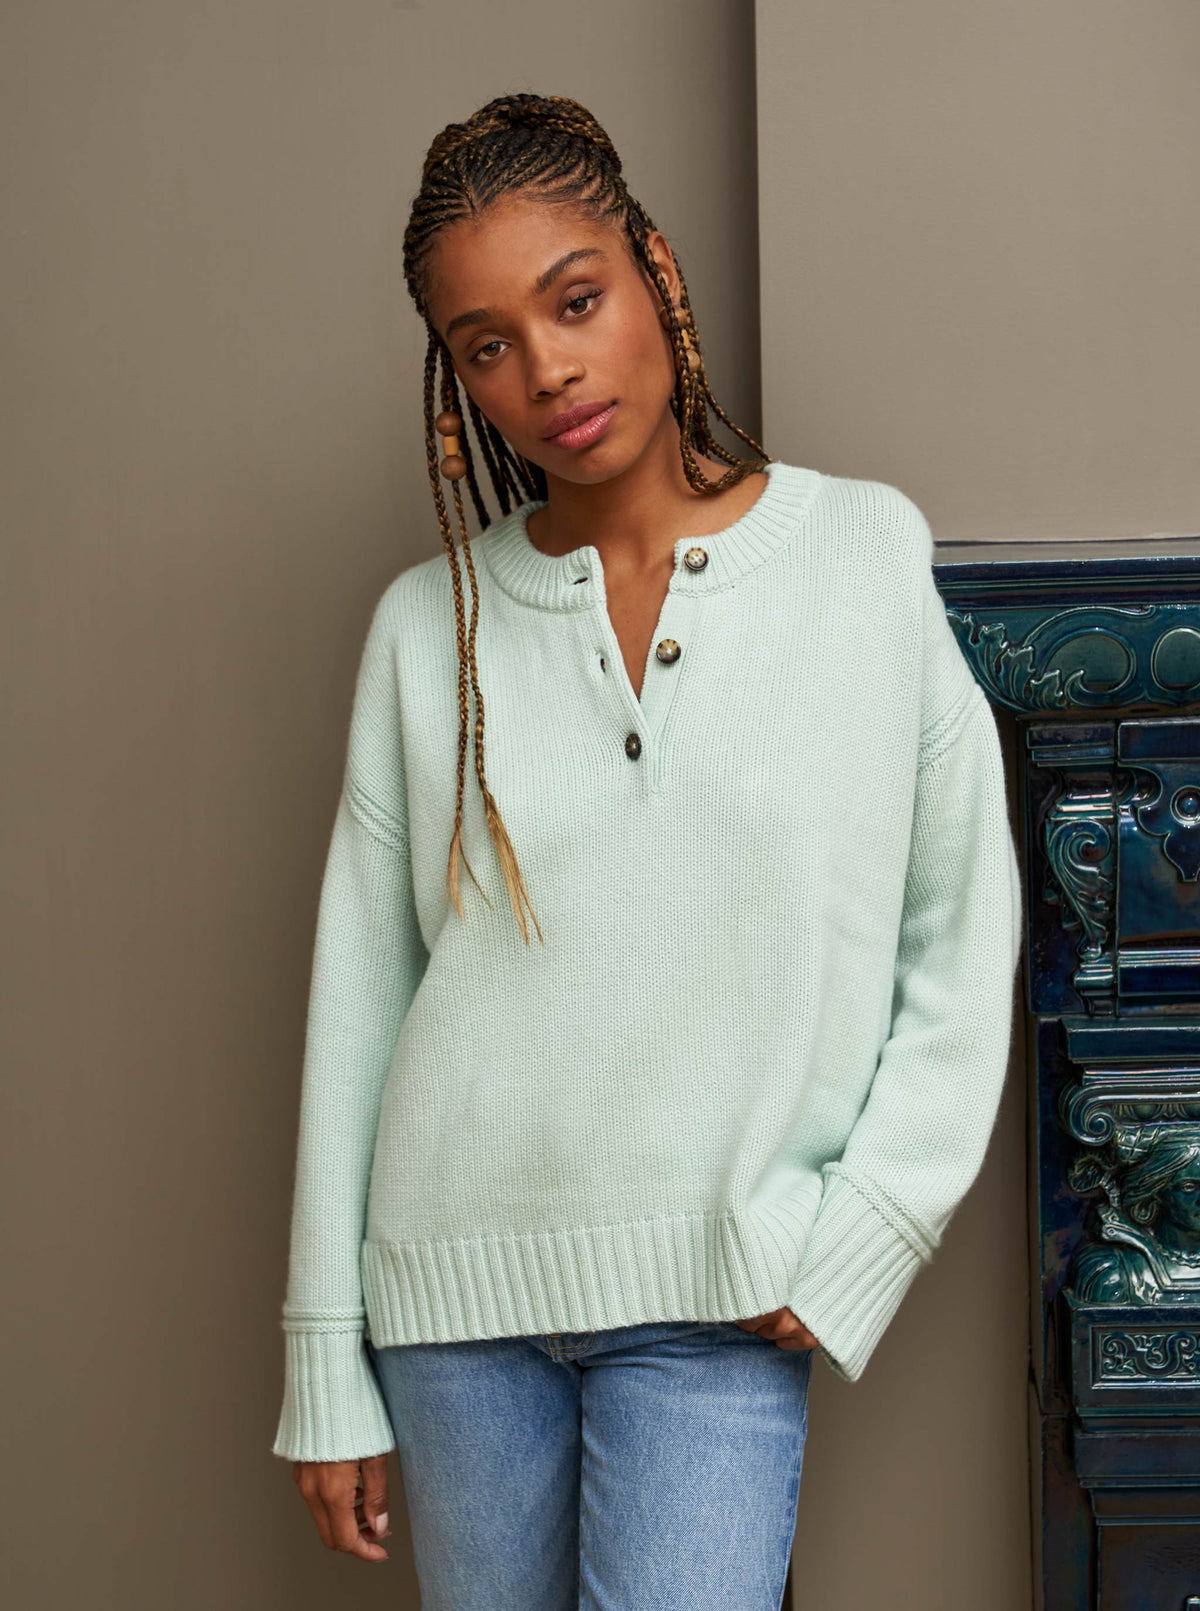 Our co-founder Valerie Macaulay's favorite sweater, this oversized henley with function button placket is chic with winter white, excellent over your favorite denim and a no brainer with a classic wide leg trouser. This 100% cashmere sweater will be your go-to season after season.